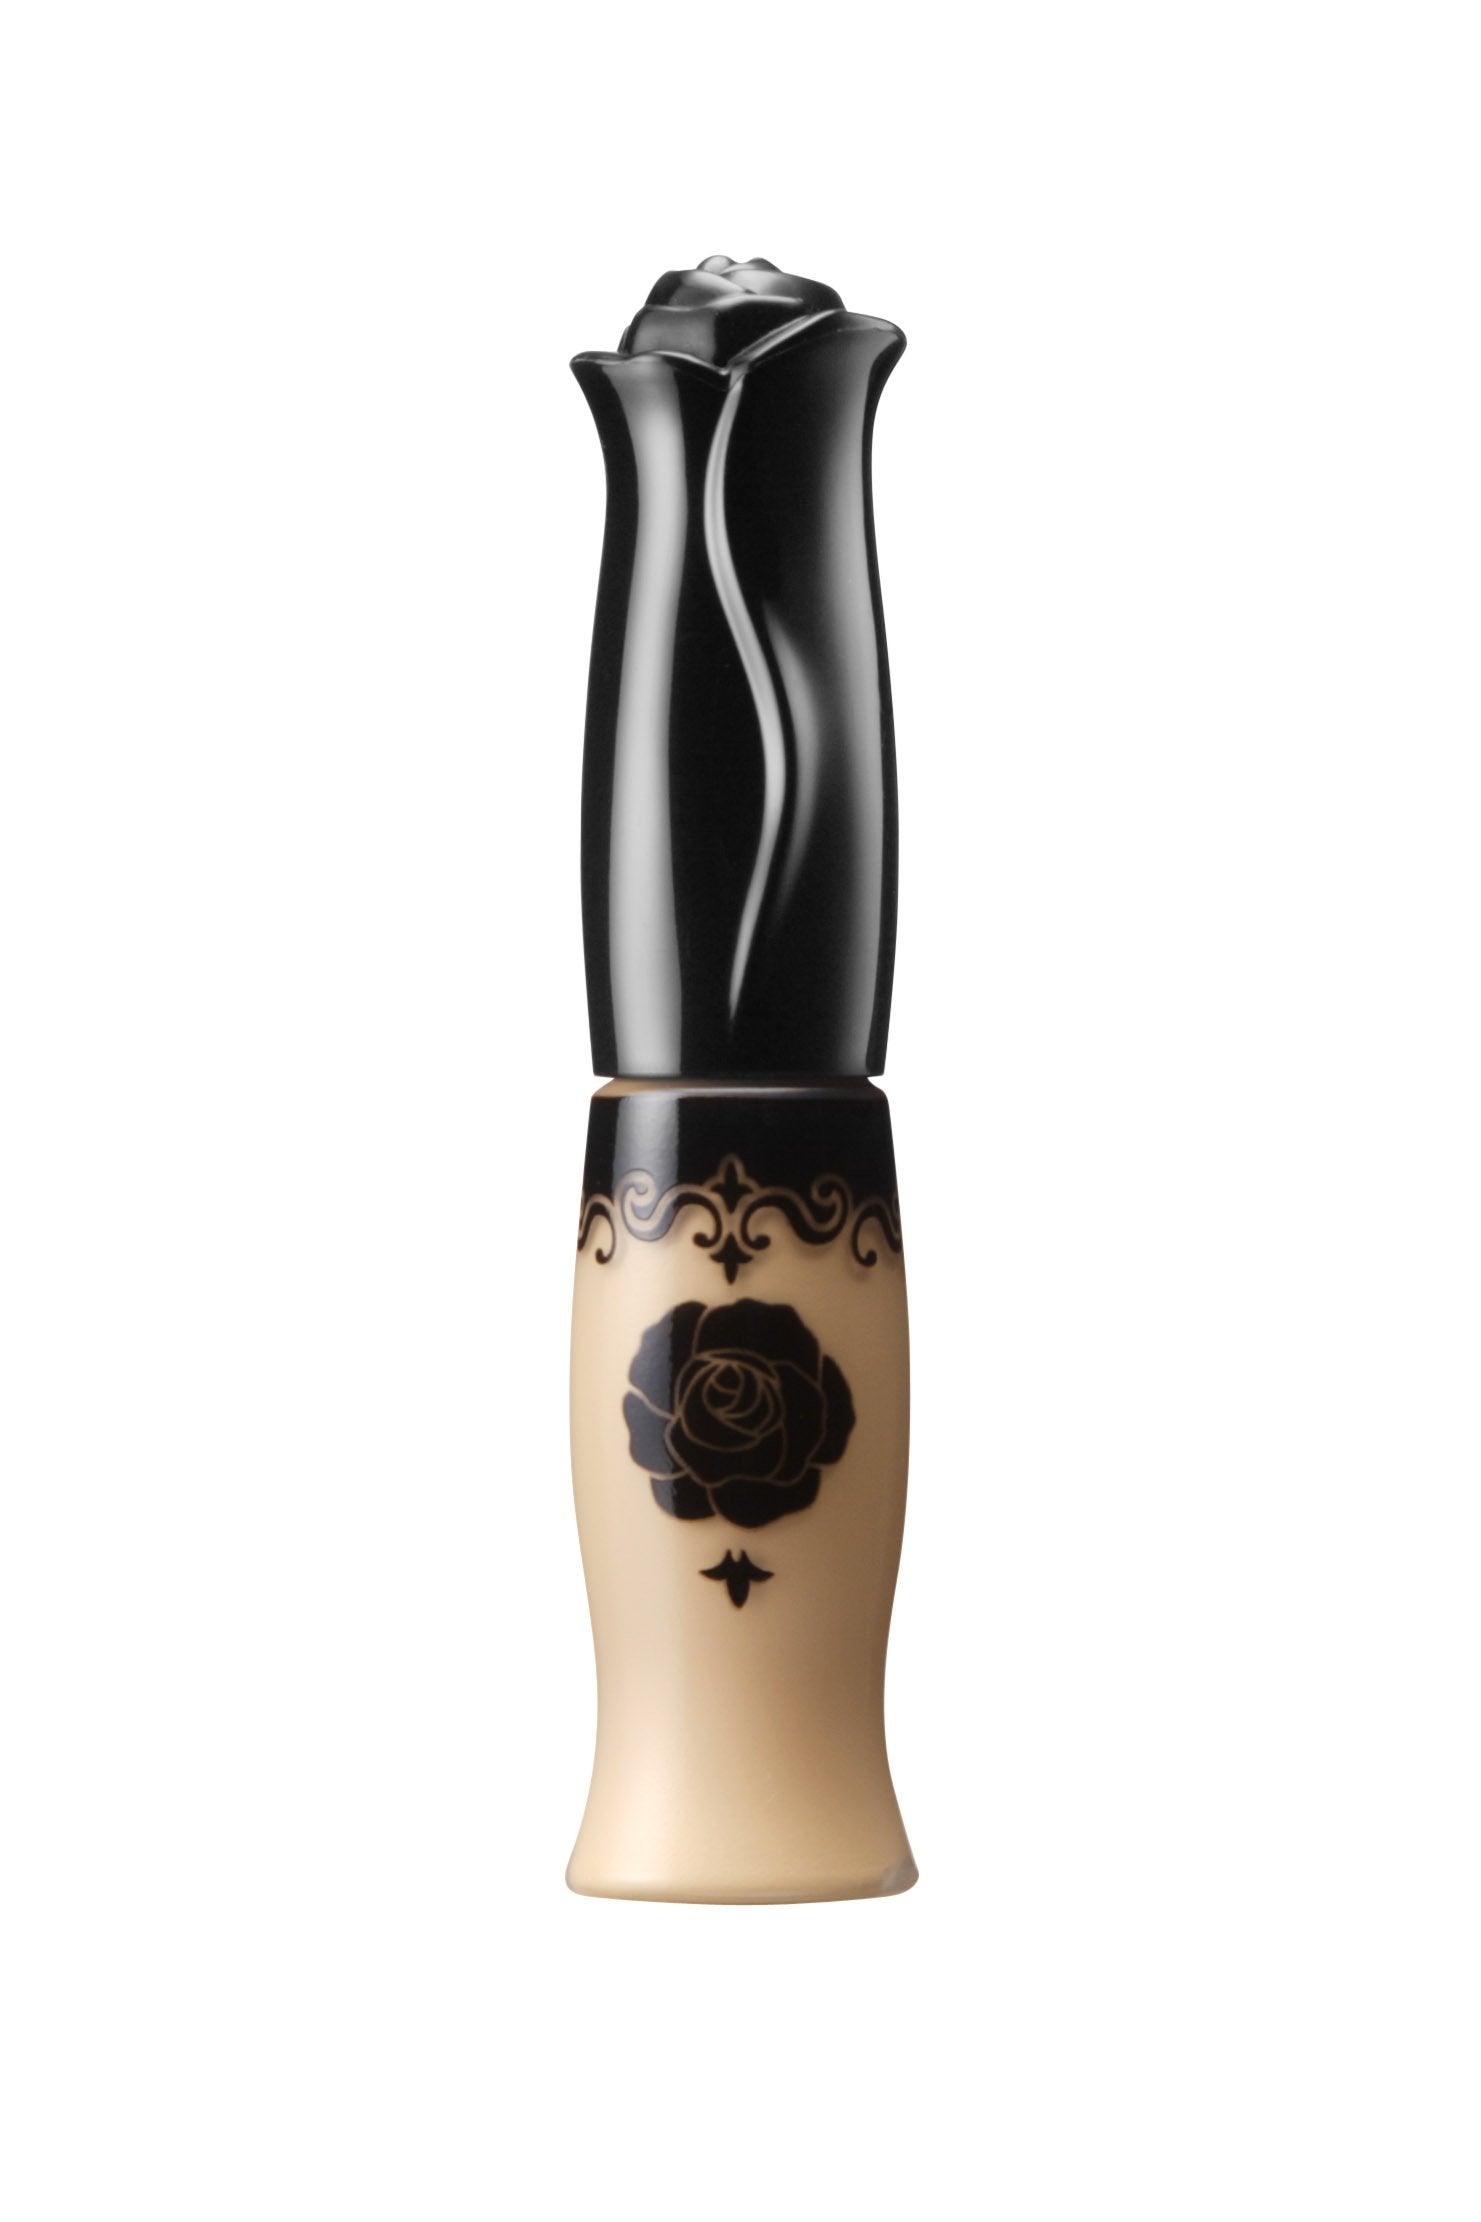 LIGHT Spot Concealer in a curvy shaped transparent container, with floral design, high black rose cap